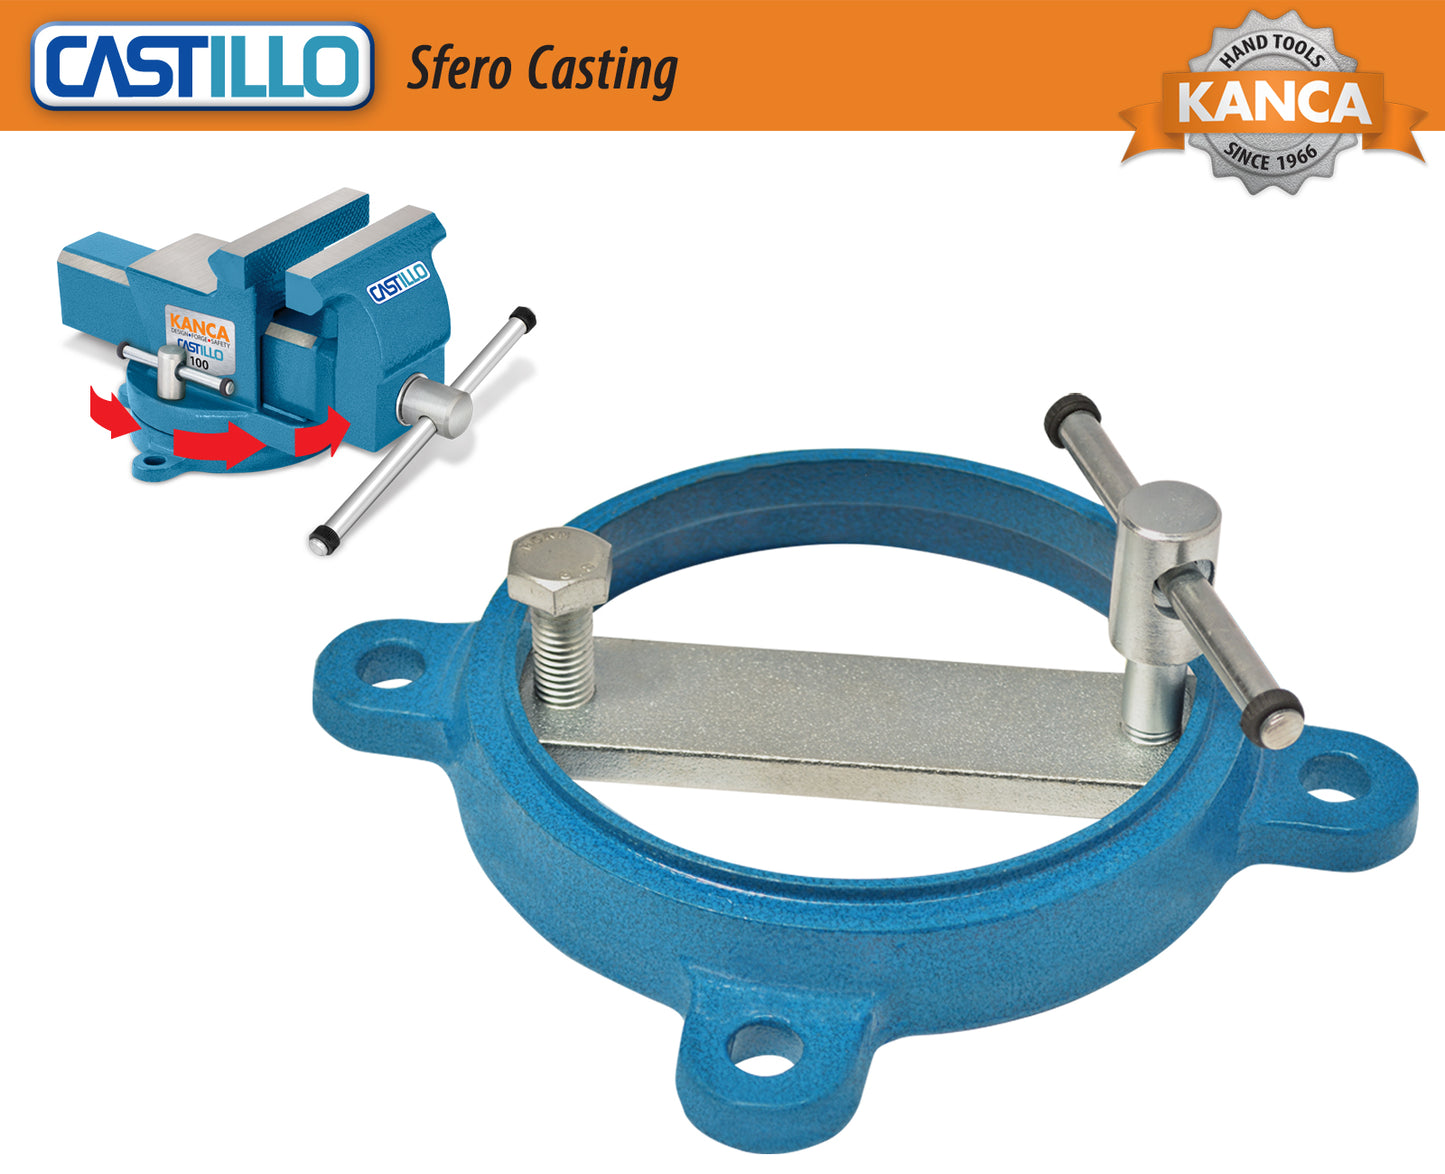 KANCA-CASTILLO, CAS-100, Bench Vise Made of Ductile Iron 4'' inch 77.000 PSI Cast Vise Jaws and Anvil Hardened